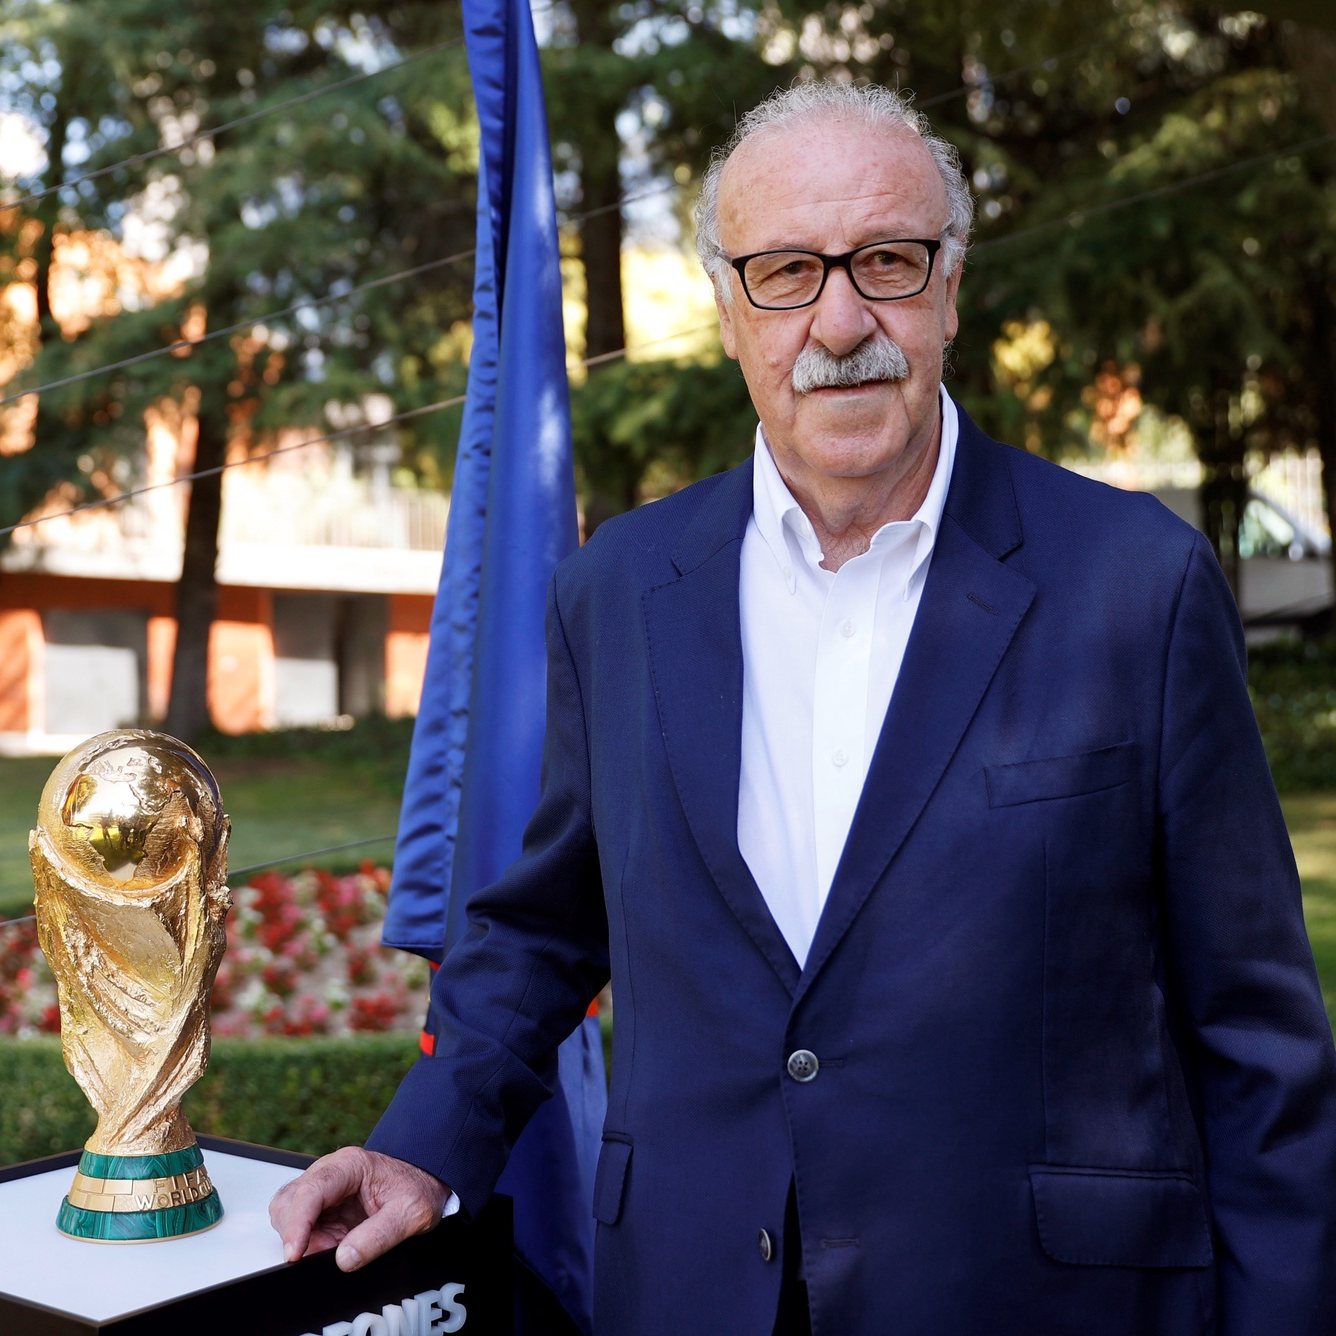 epa08538337 Former Spanish national soccer team head coach Vicente del Bosque poses next to the FIFA World Cup trophy during an event to commemorate the 10th anniversary of Spain&#039;s victory at the 2010 FIFA World Cup in Madrid, Spain, 10 July 2020. Spain defeated the Netherlands 1-0 after extra time in the 2010 FIFA World Cup final at Soccer City Stadium in Johannesburg, South Africa on 11 July 2010.  EPA/MARISCAL